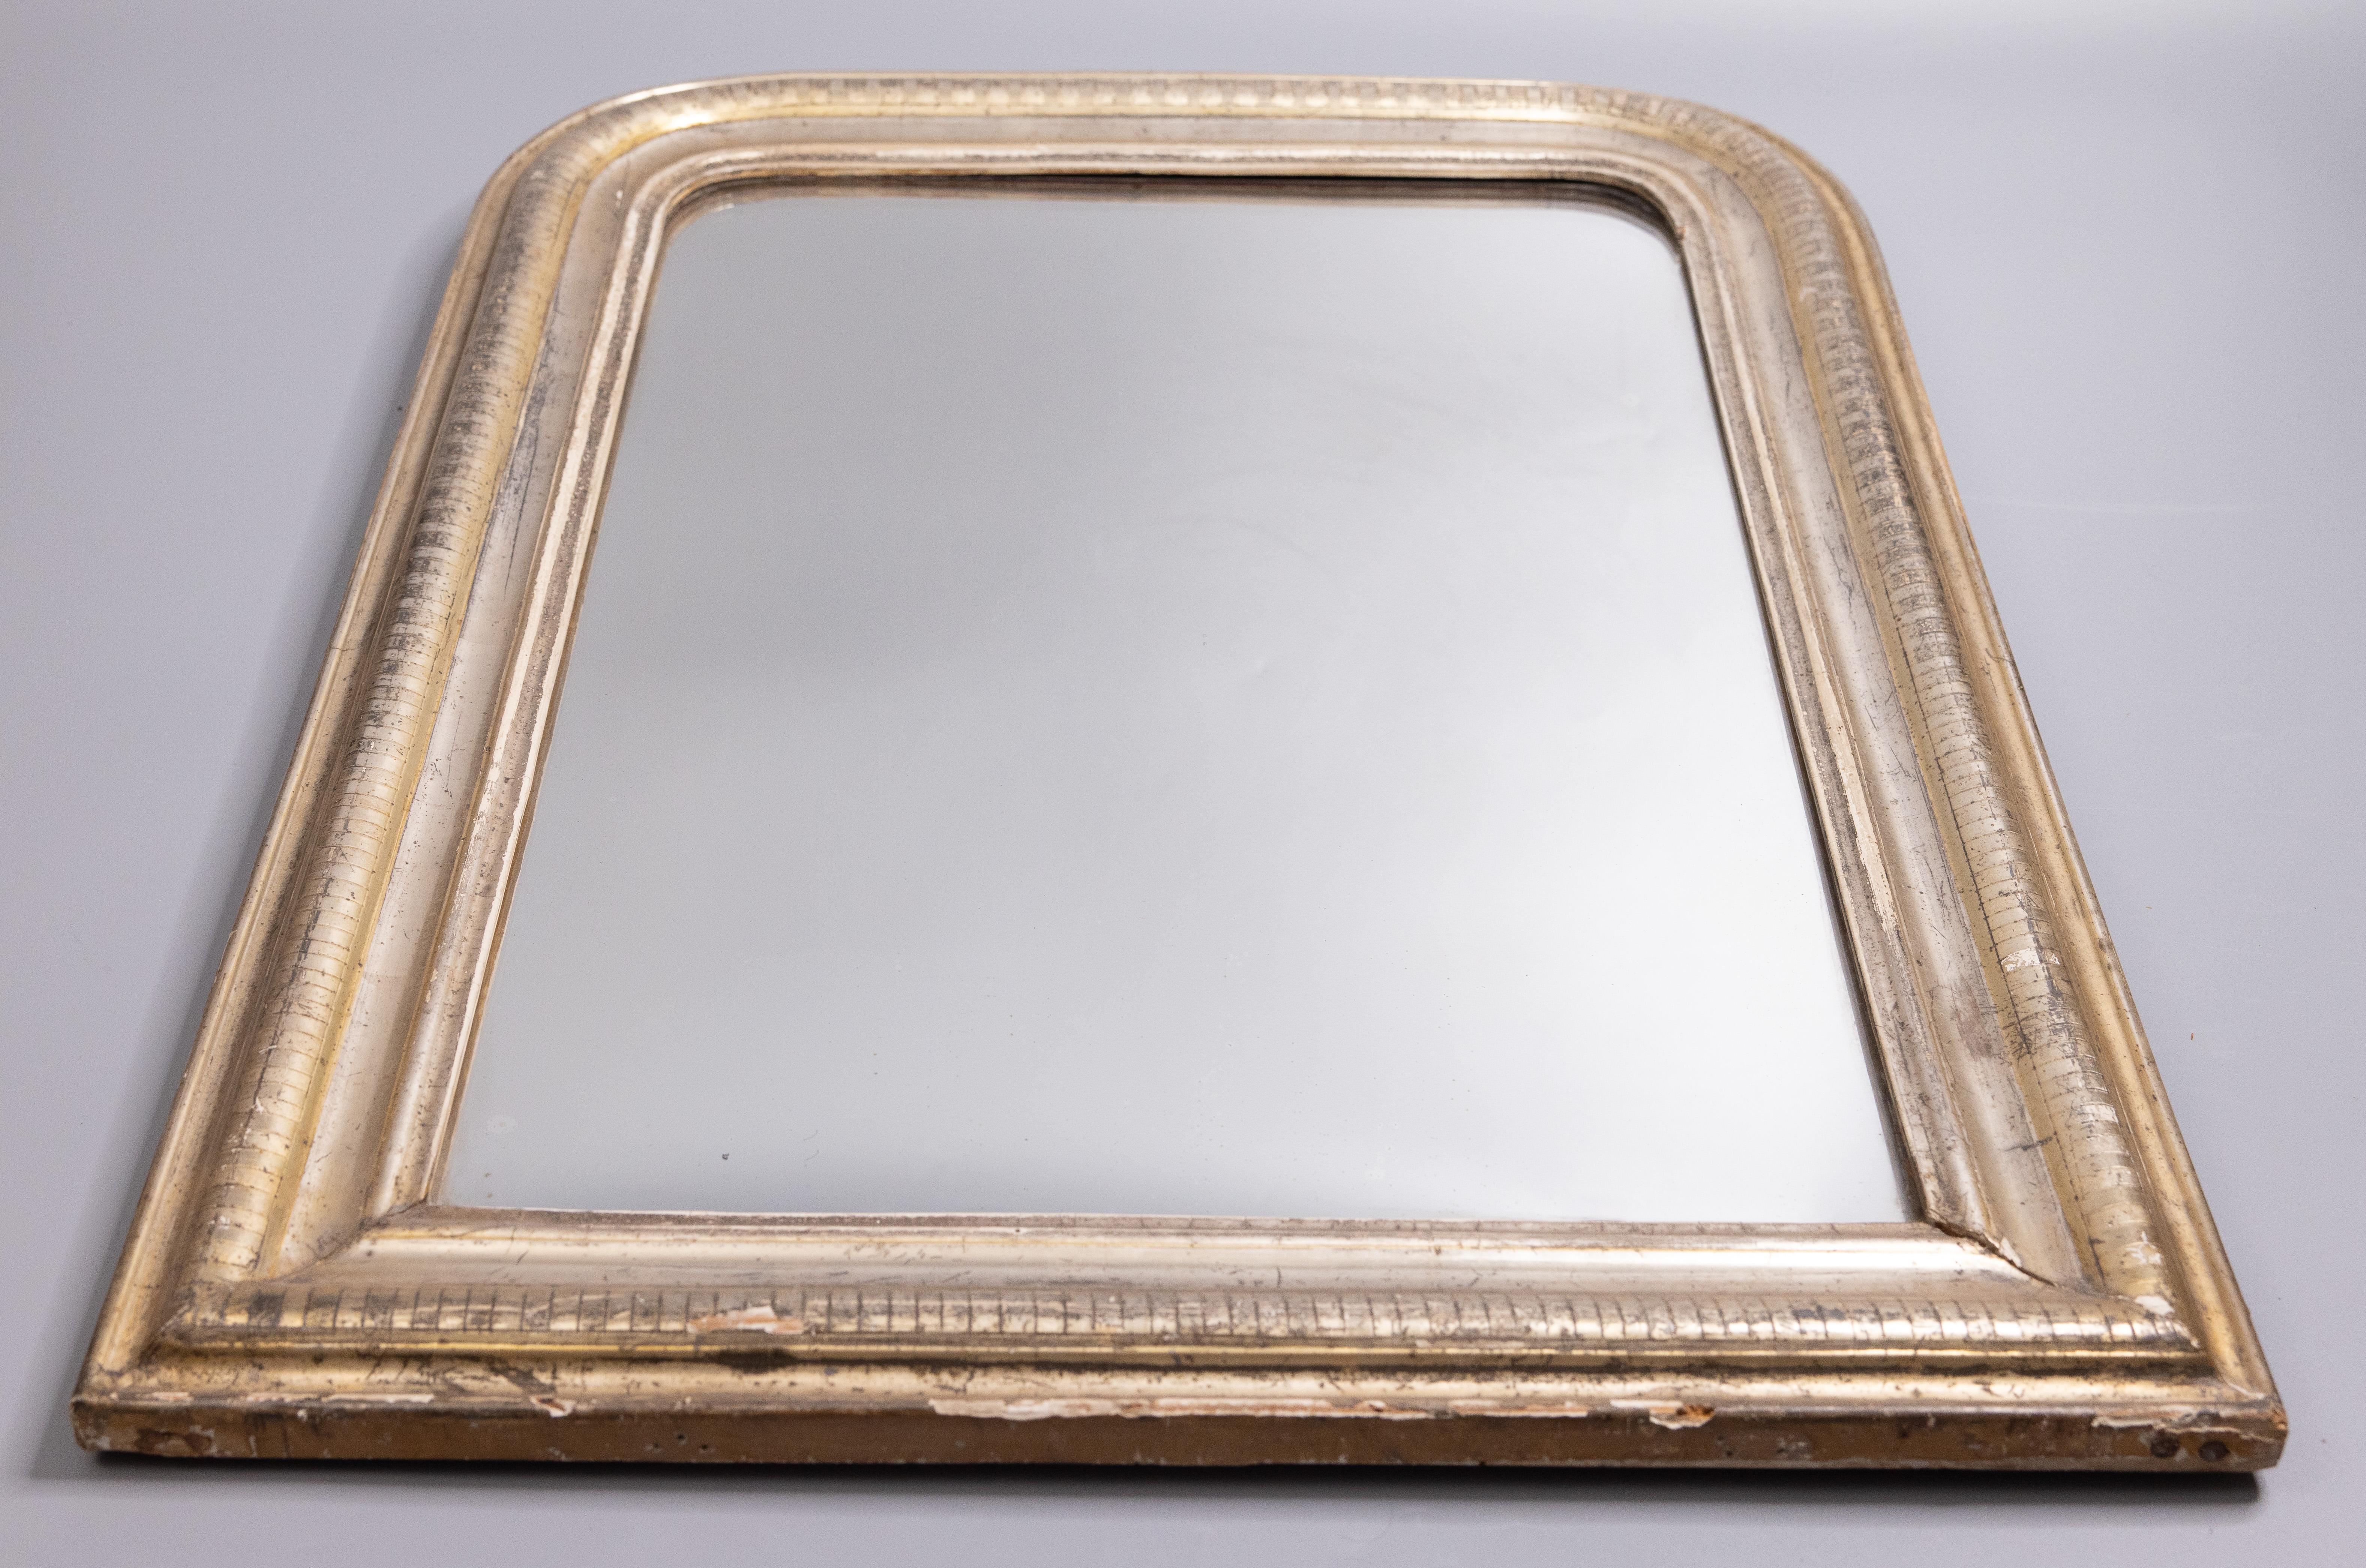 An elegant 19th-Century French Louis Philippe silver leaf giltwood mirror, circa 1860. This fine mirror has a lovely striped geometric design in a beautiful silver patina and retains the original mirror glass and wood backing. It's a wonderful